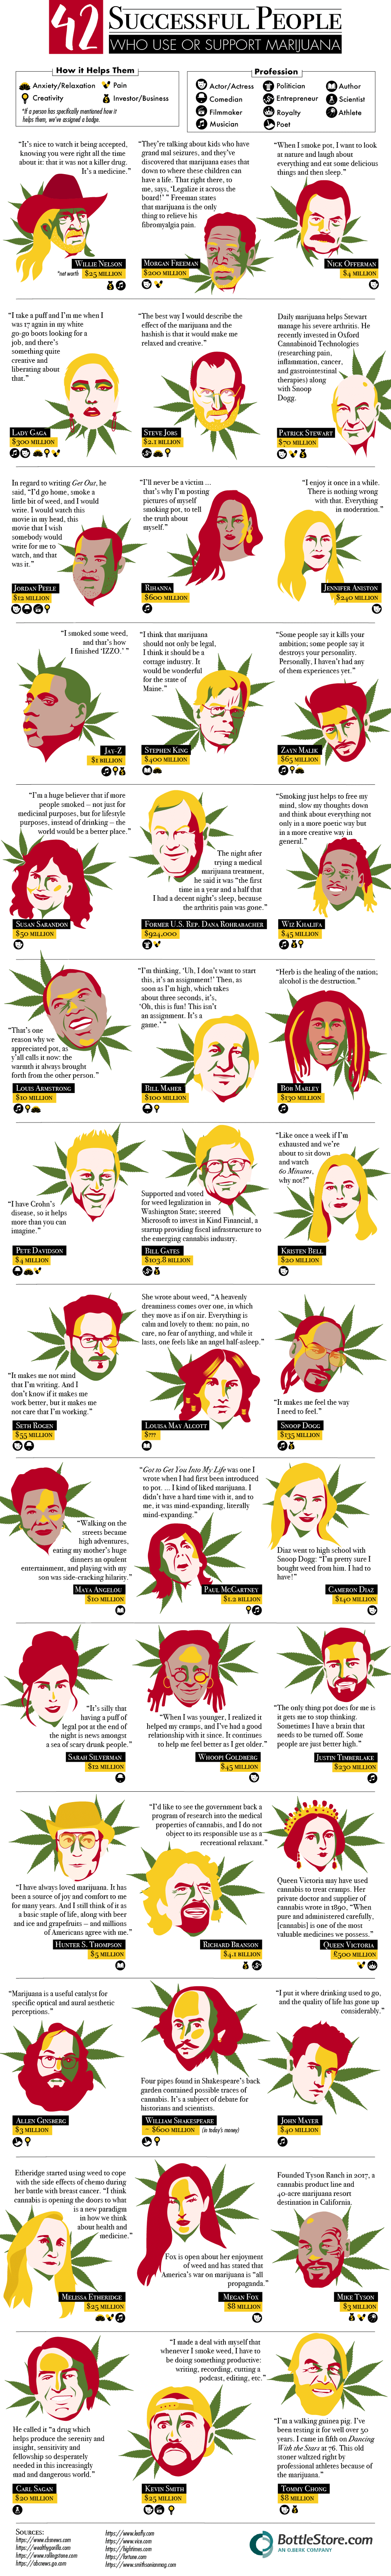 42 Successful People Who Use or Support Marijuana